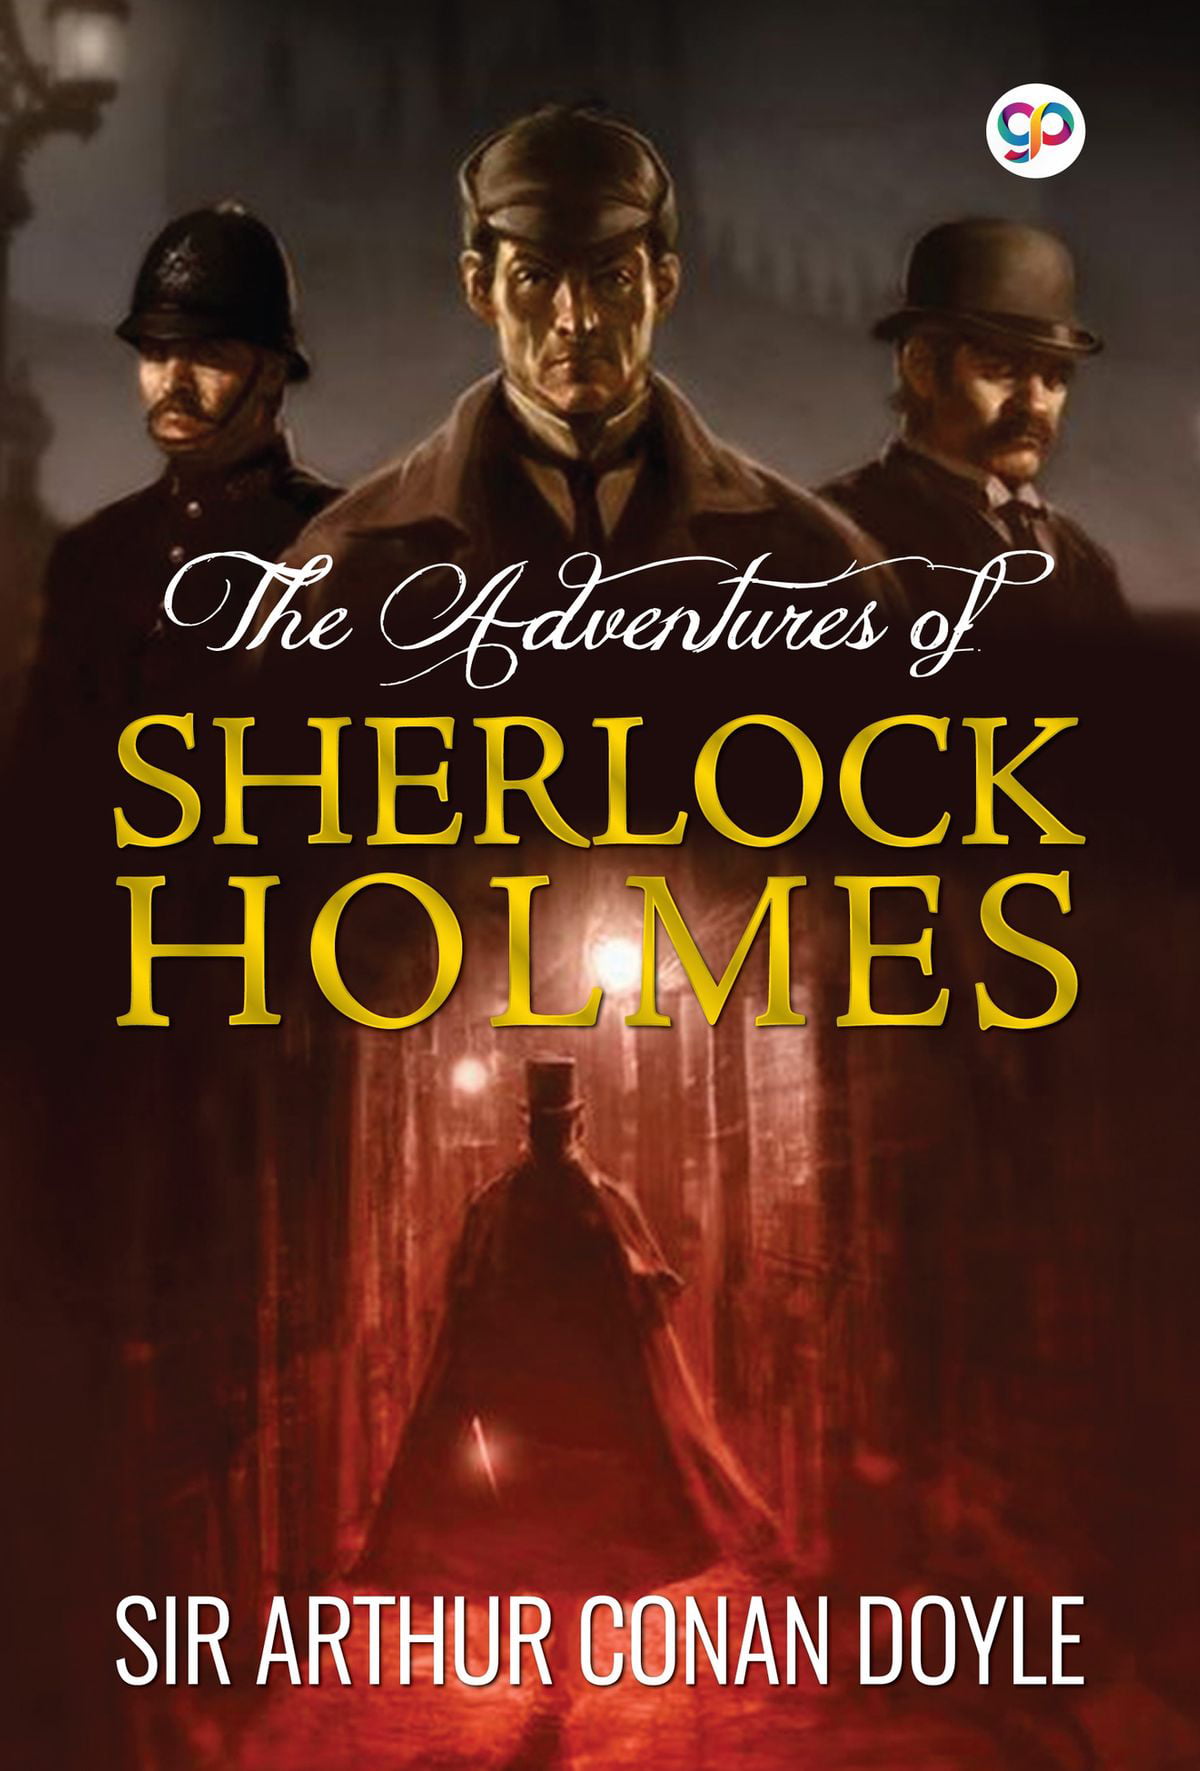 a book review of sherlock holmes